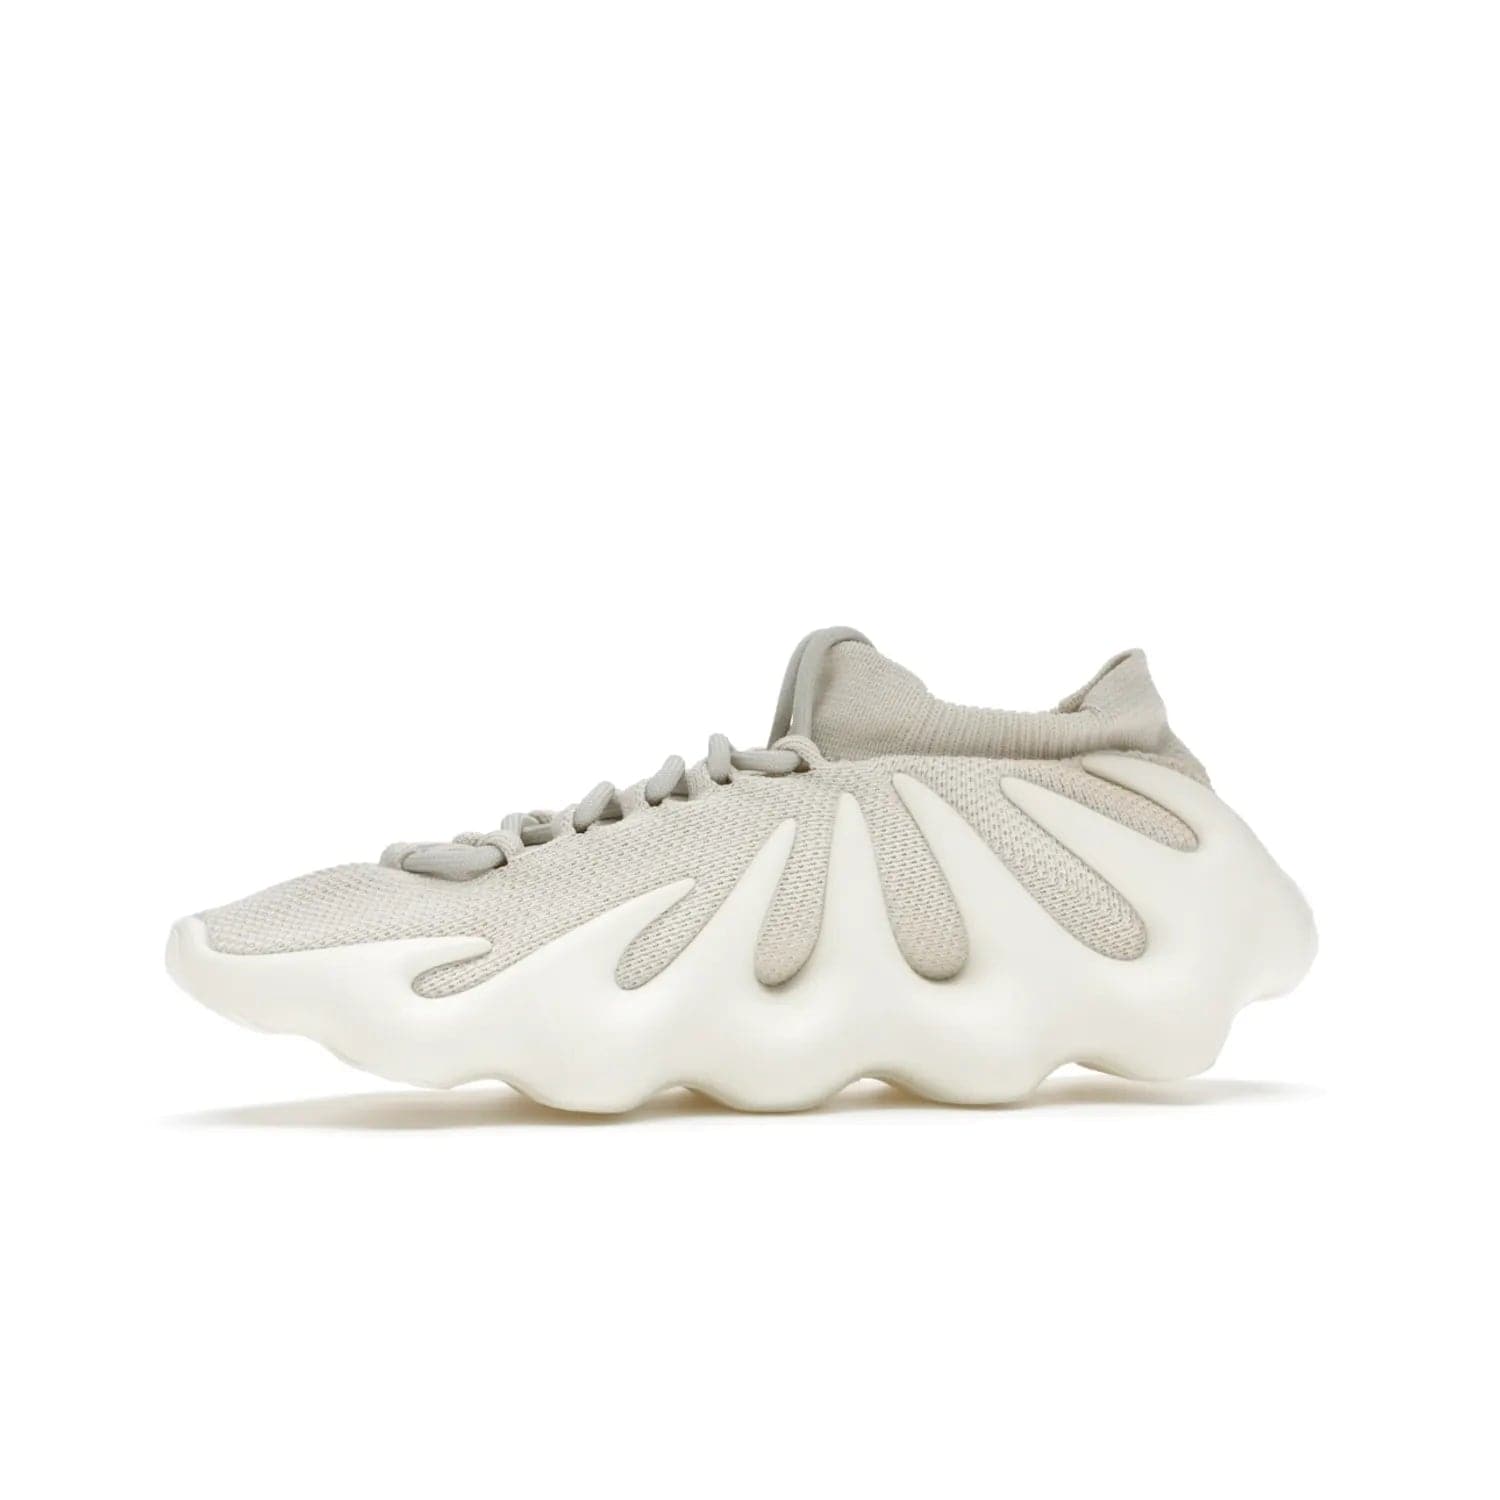 adidas Yeezy 450 Cloud White - Image 18 - Only at www.BallersClubKickz.com - Experience the future with the adidas Yeezy 450 Cloud White. A two-piece design featuring an extreme foam sole and mesh upper, this silhouette is expected to release in March 2021. Get your hands on this striking Cloud White/Cloud White colorway and stand out in the crowd.